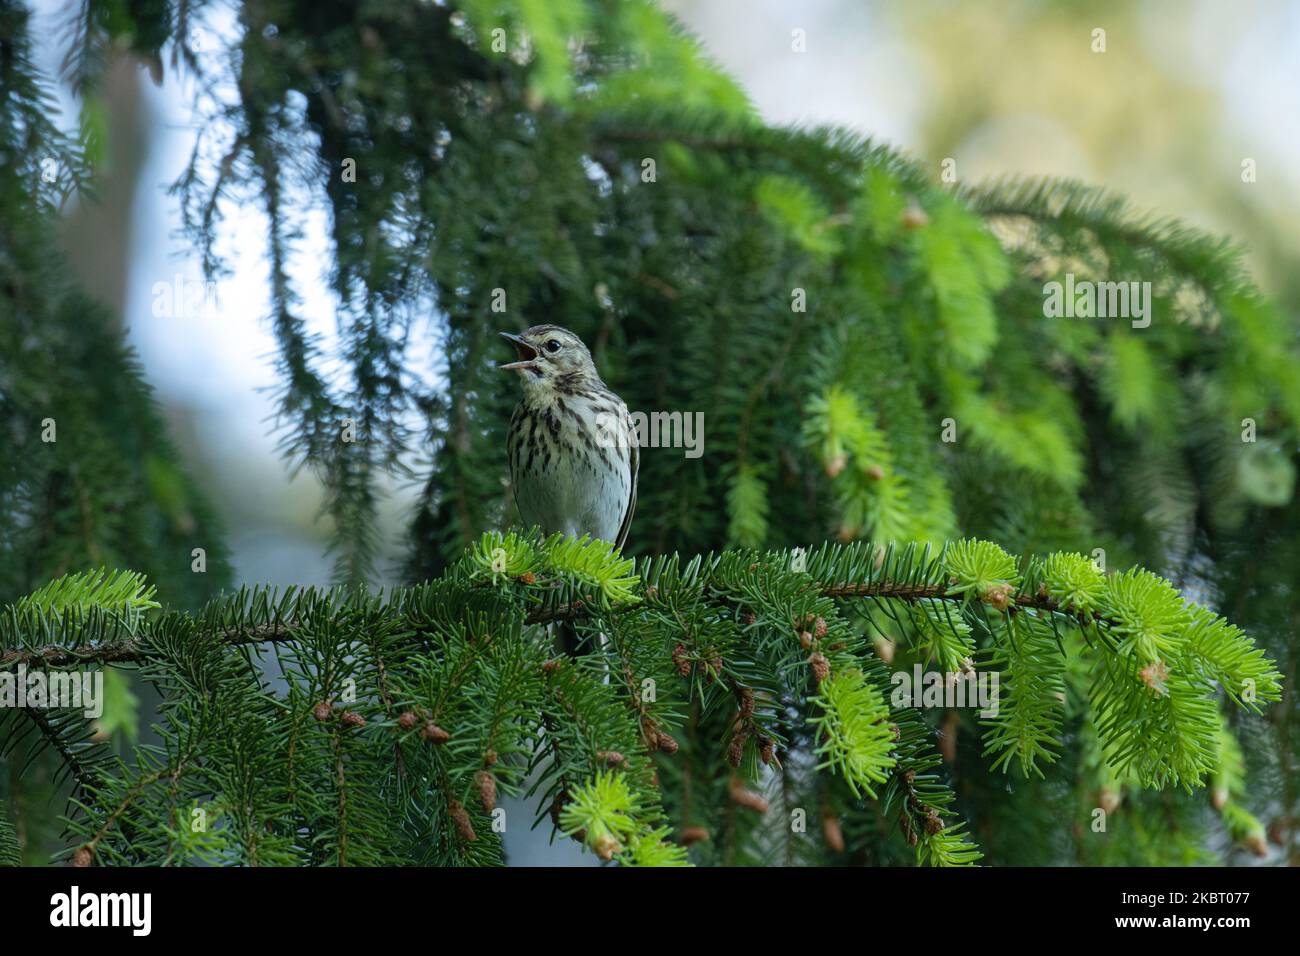 Wood pipit perched on a Spruce branch in a summery boreal forest in Estonia, Northern Europe Stock Photo